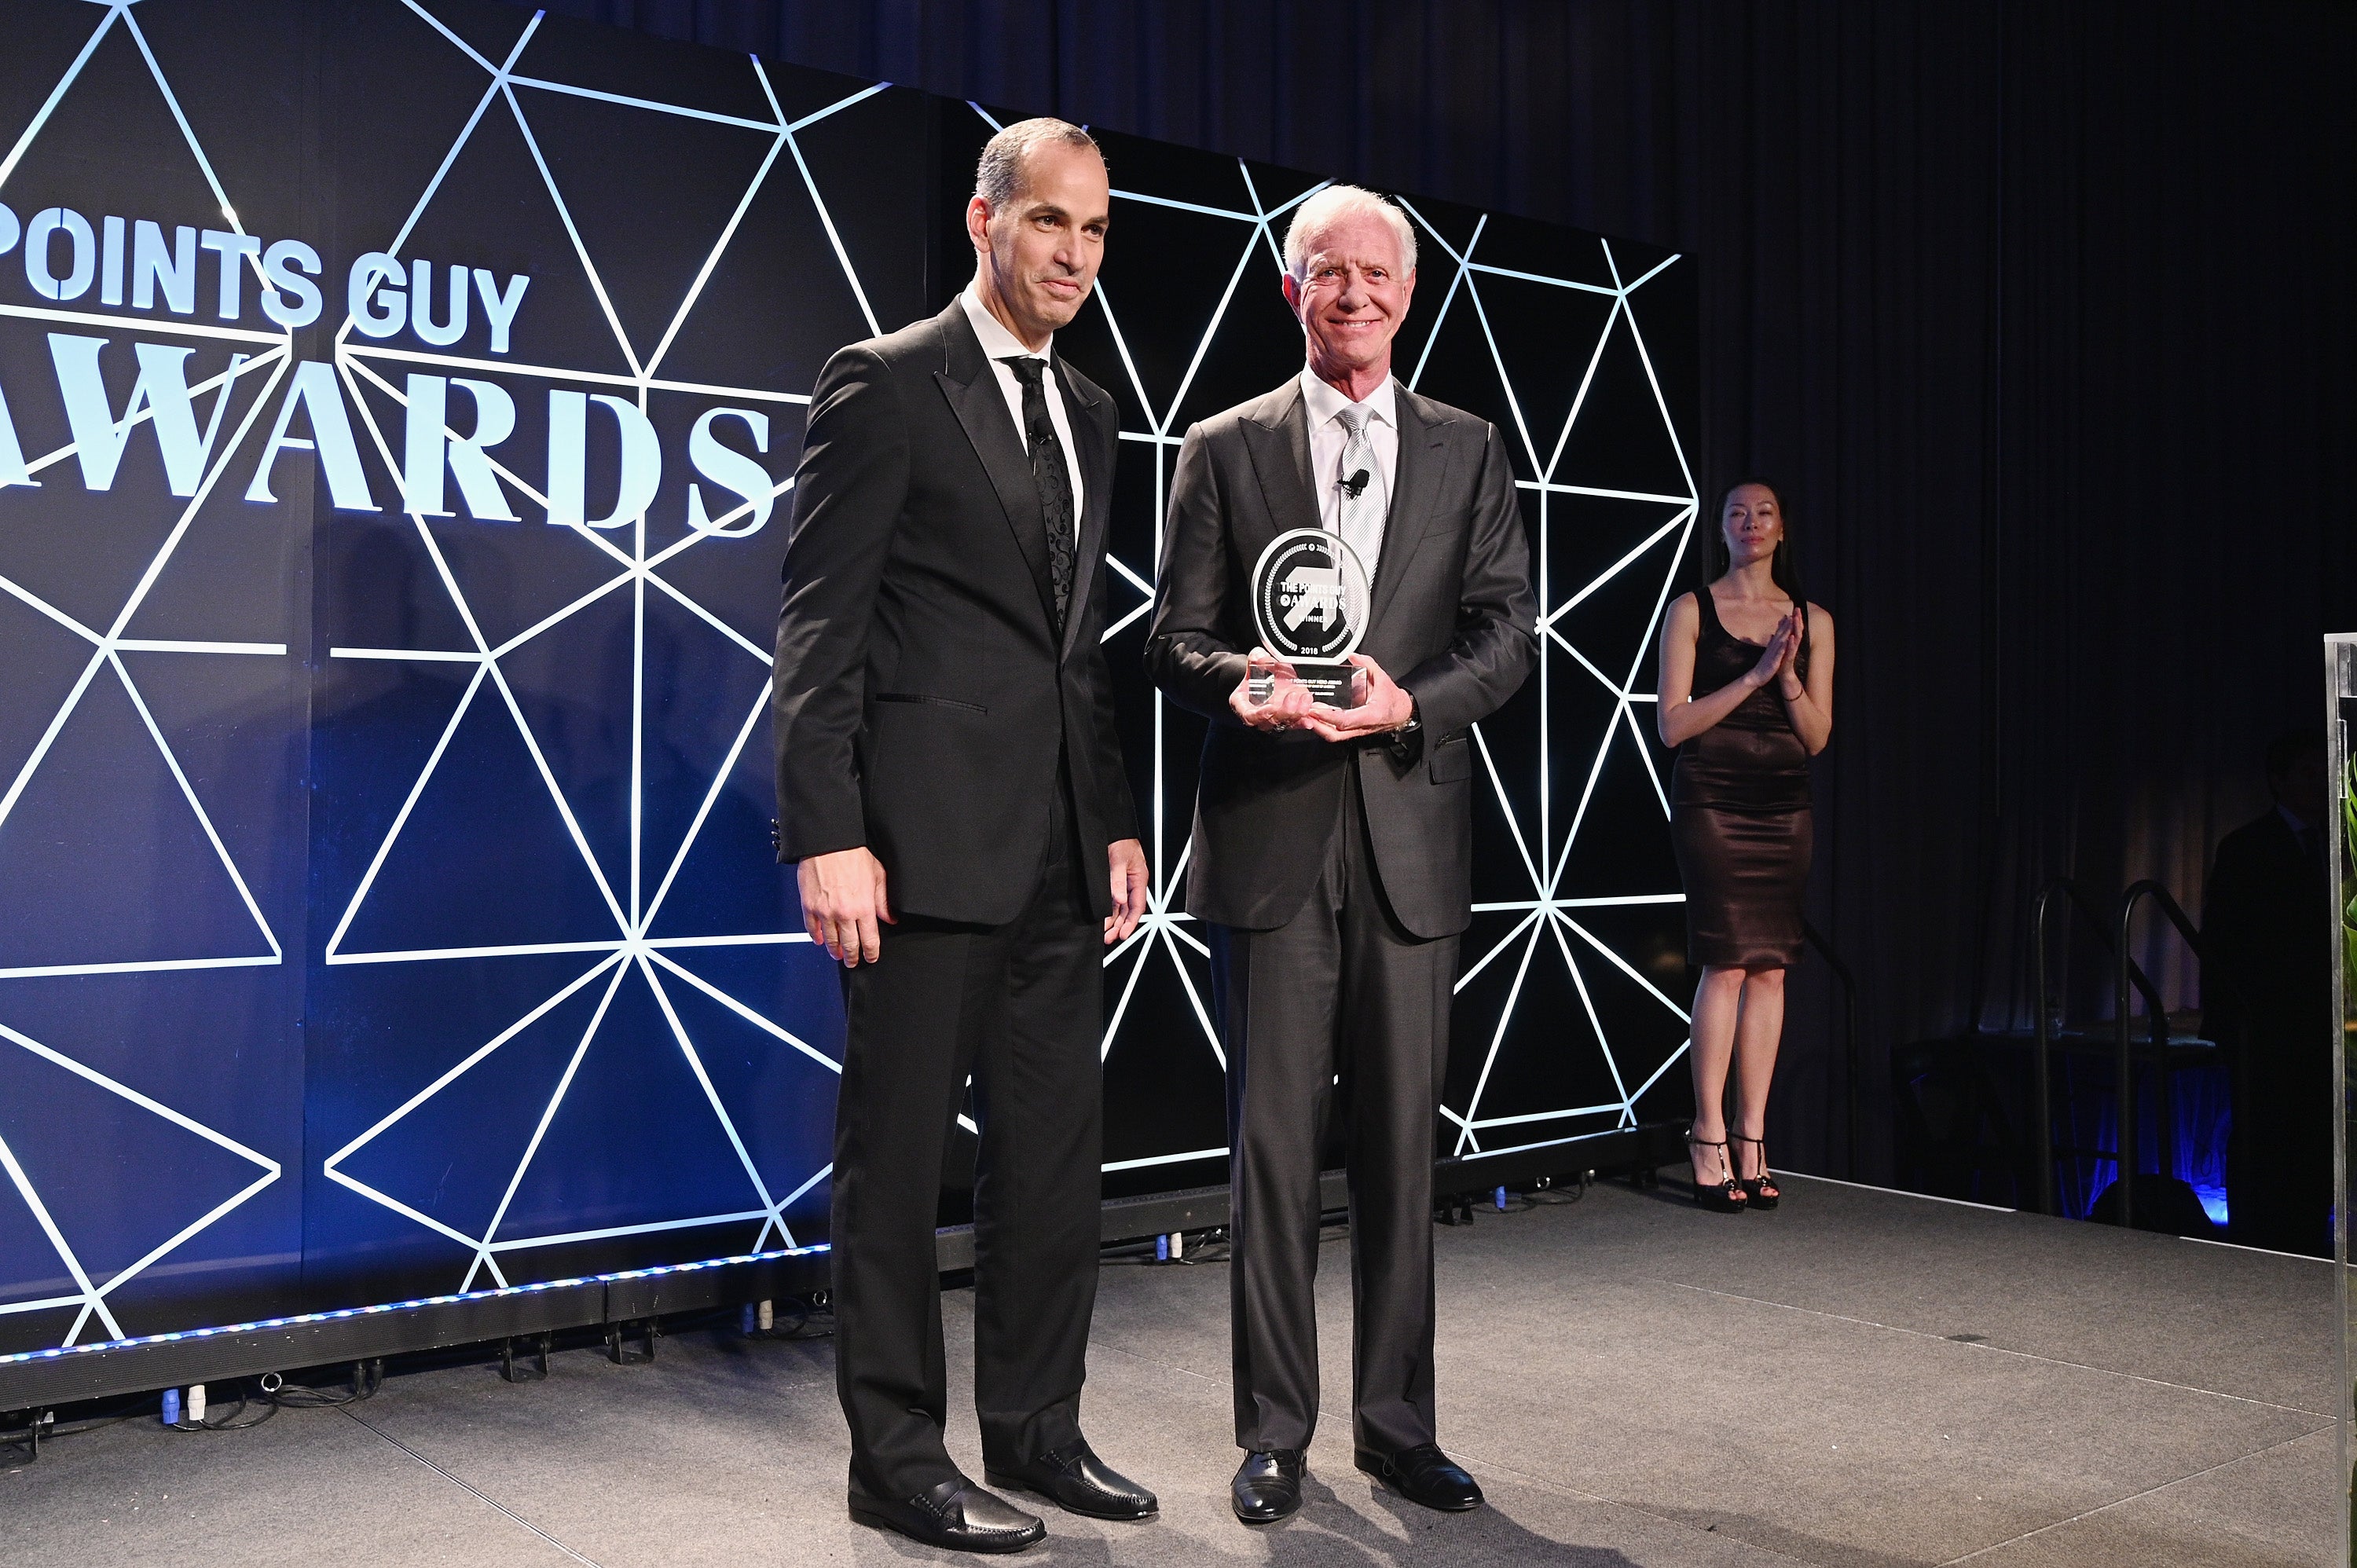 Ric Elias and Honoree Captain Chesley "Sully" Sullenberger onstage during The Points Guy Awards in 2018.